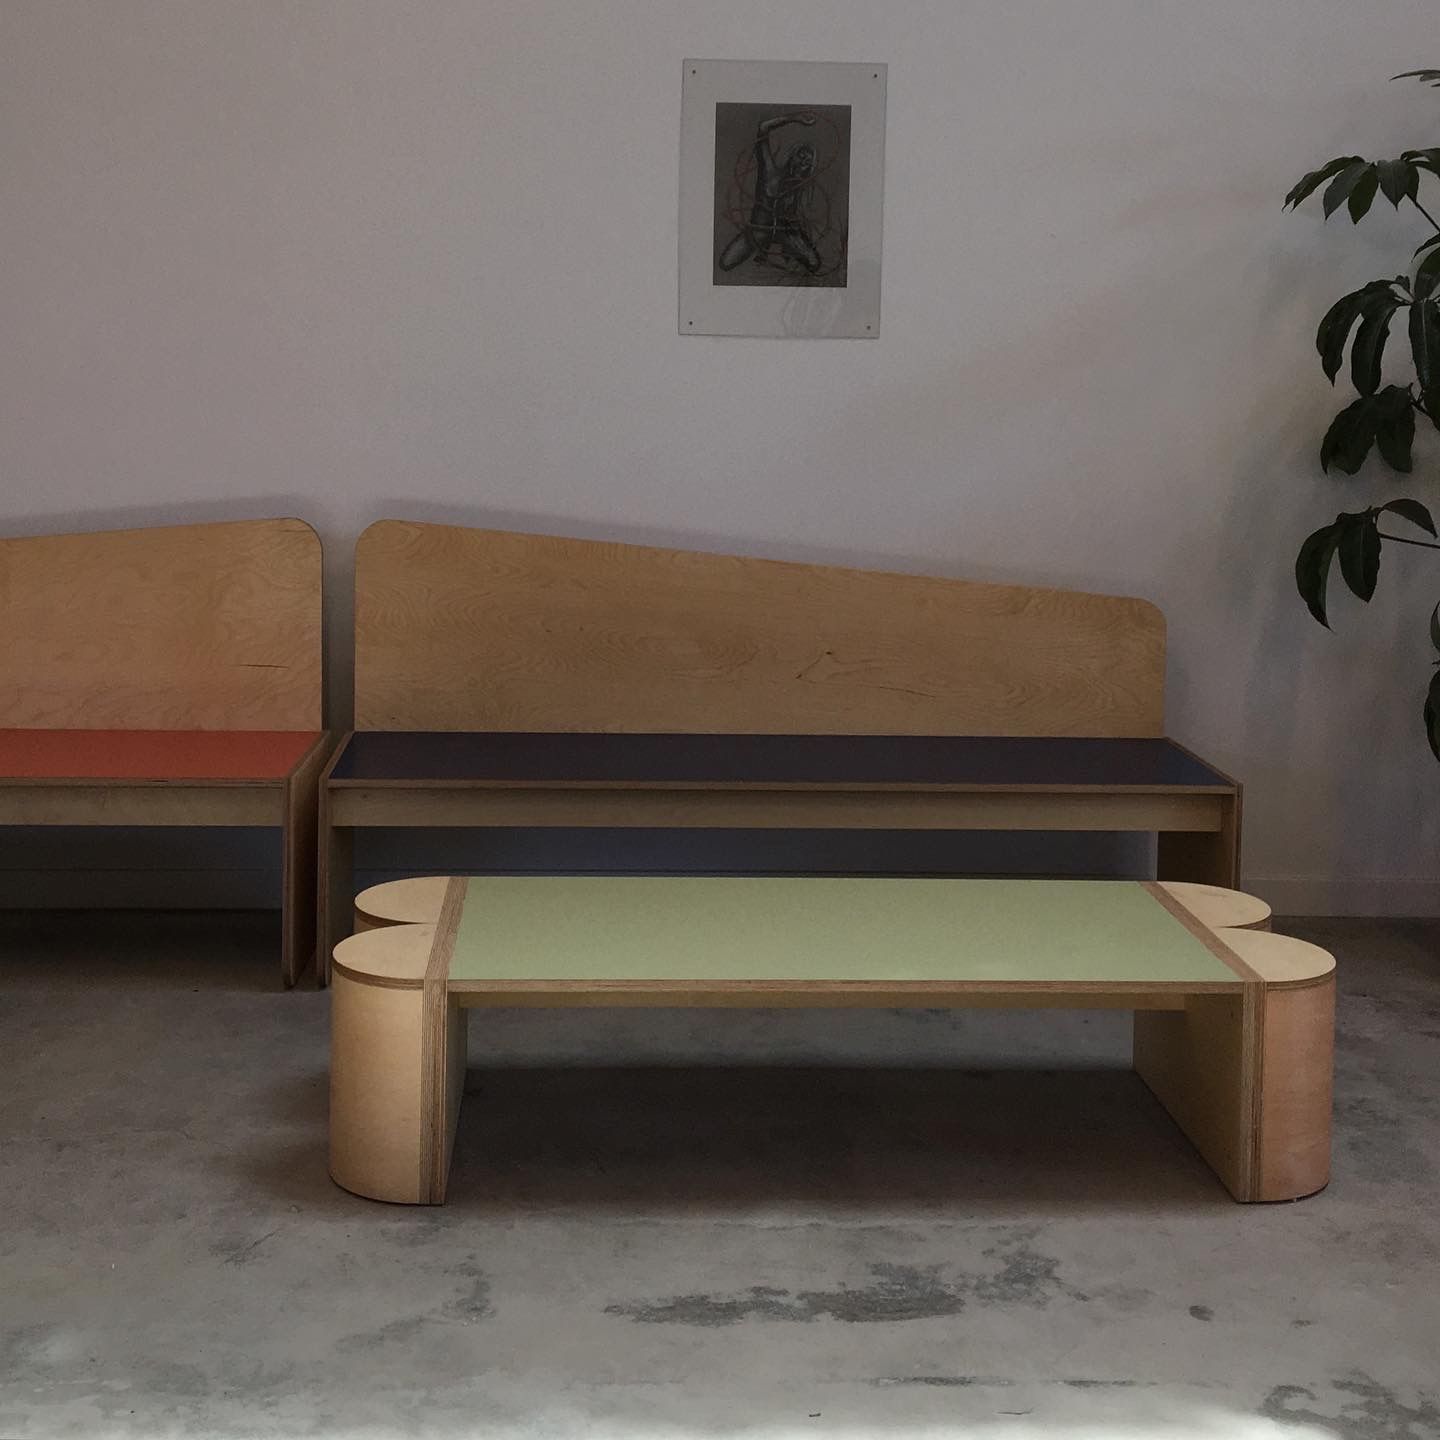  Bench and Table set - Murmurs Gallery product image 1